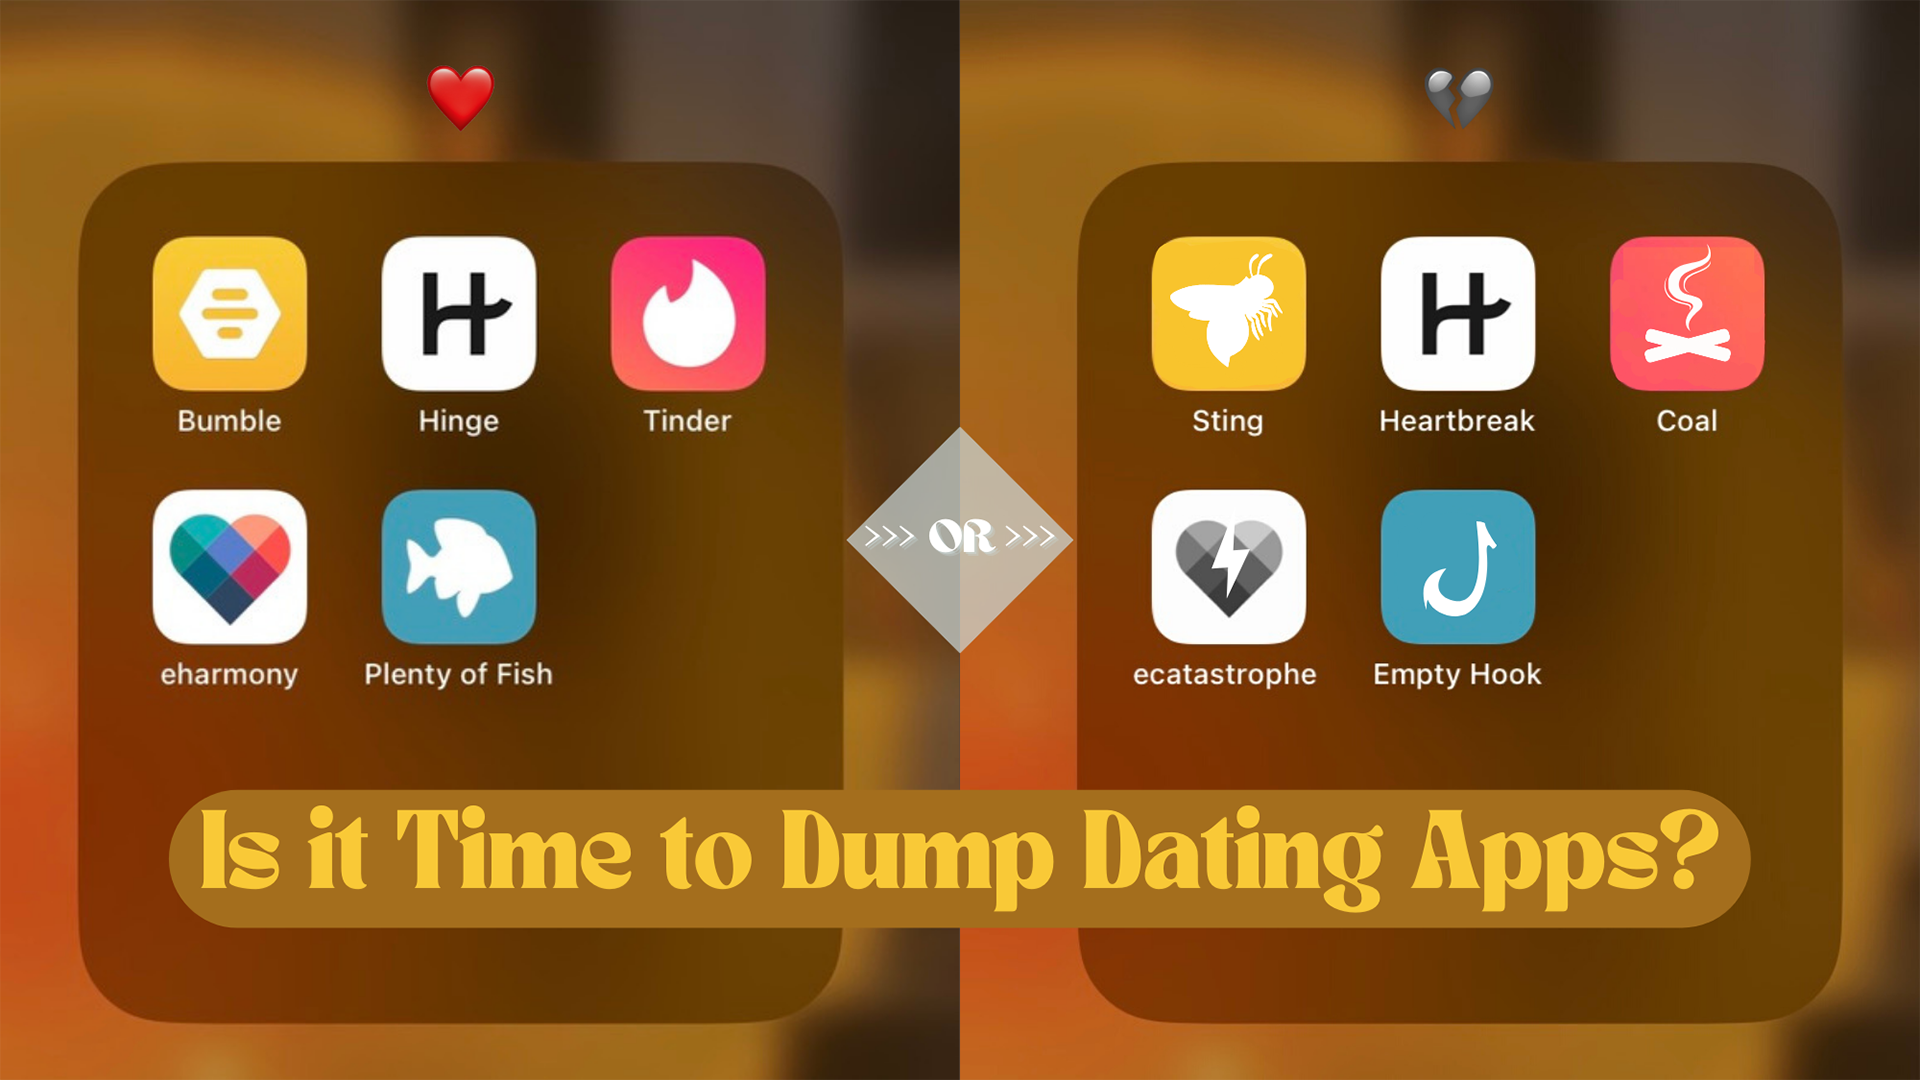 Depicts alternate, negative versions of dating apps, text reads “Is it time to dump dating apps?